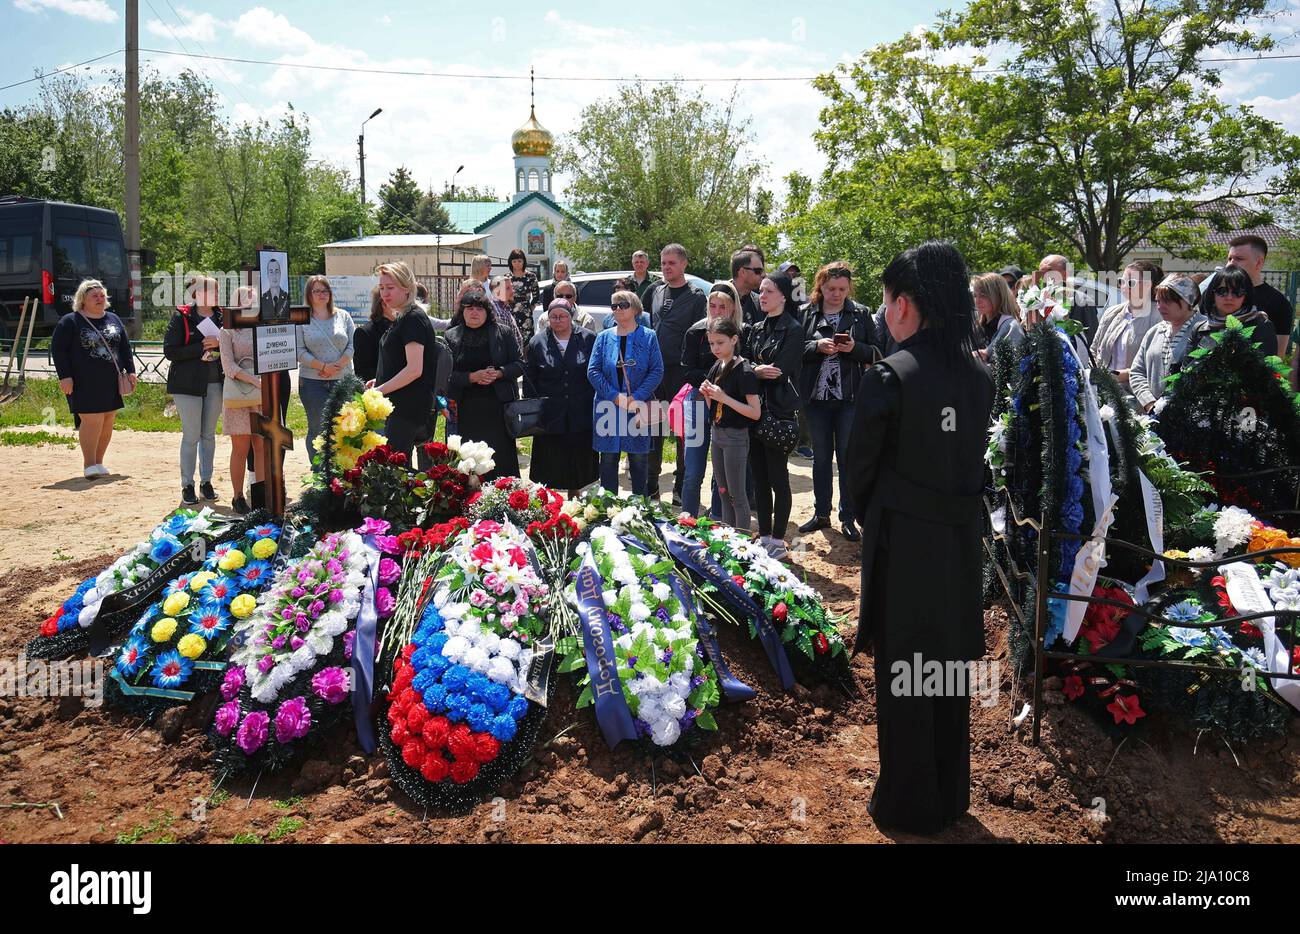 Mourners attend a funeral of Russian army sapper Danil Dumenko, who was killed during the military conflict in Ukraine, at a cemetery in Volzhsky, Russia May 26, 2022. REUTERS/REUTERS PHOTOGRAPHER Stock Photo